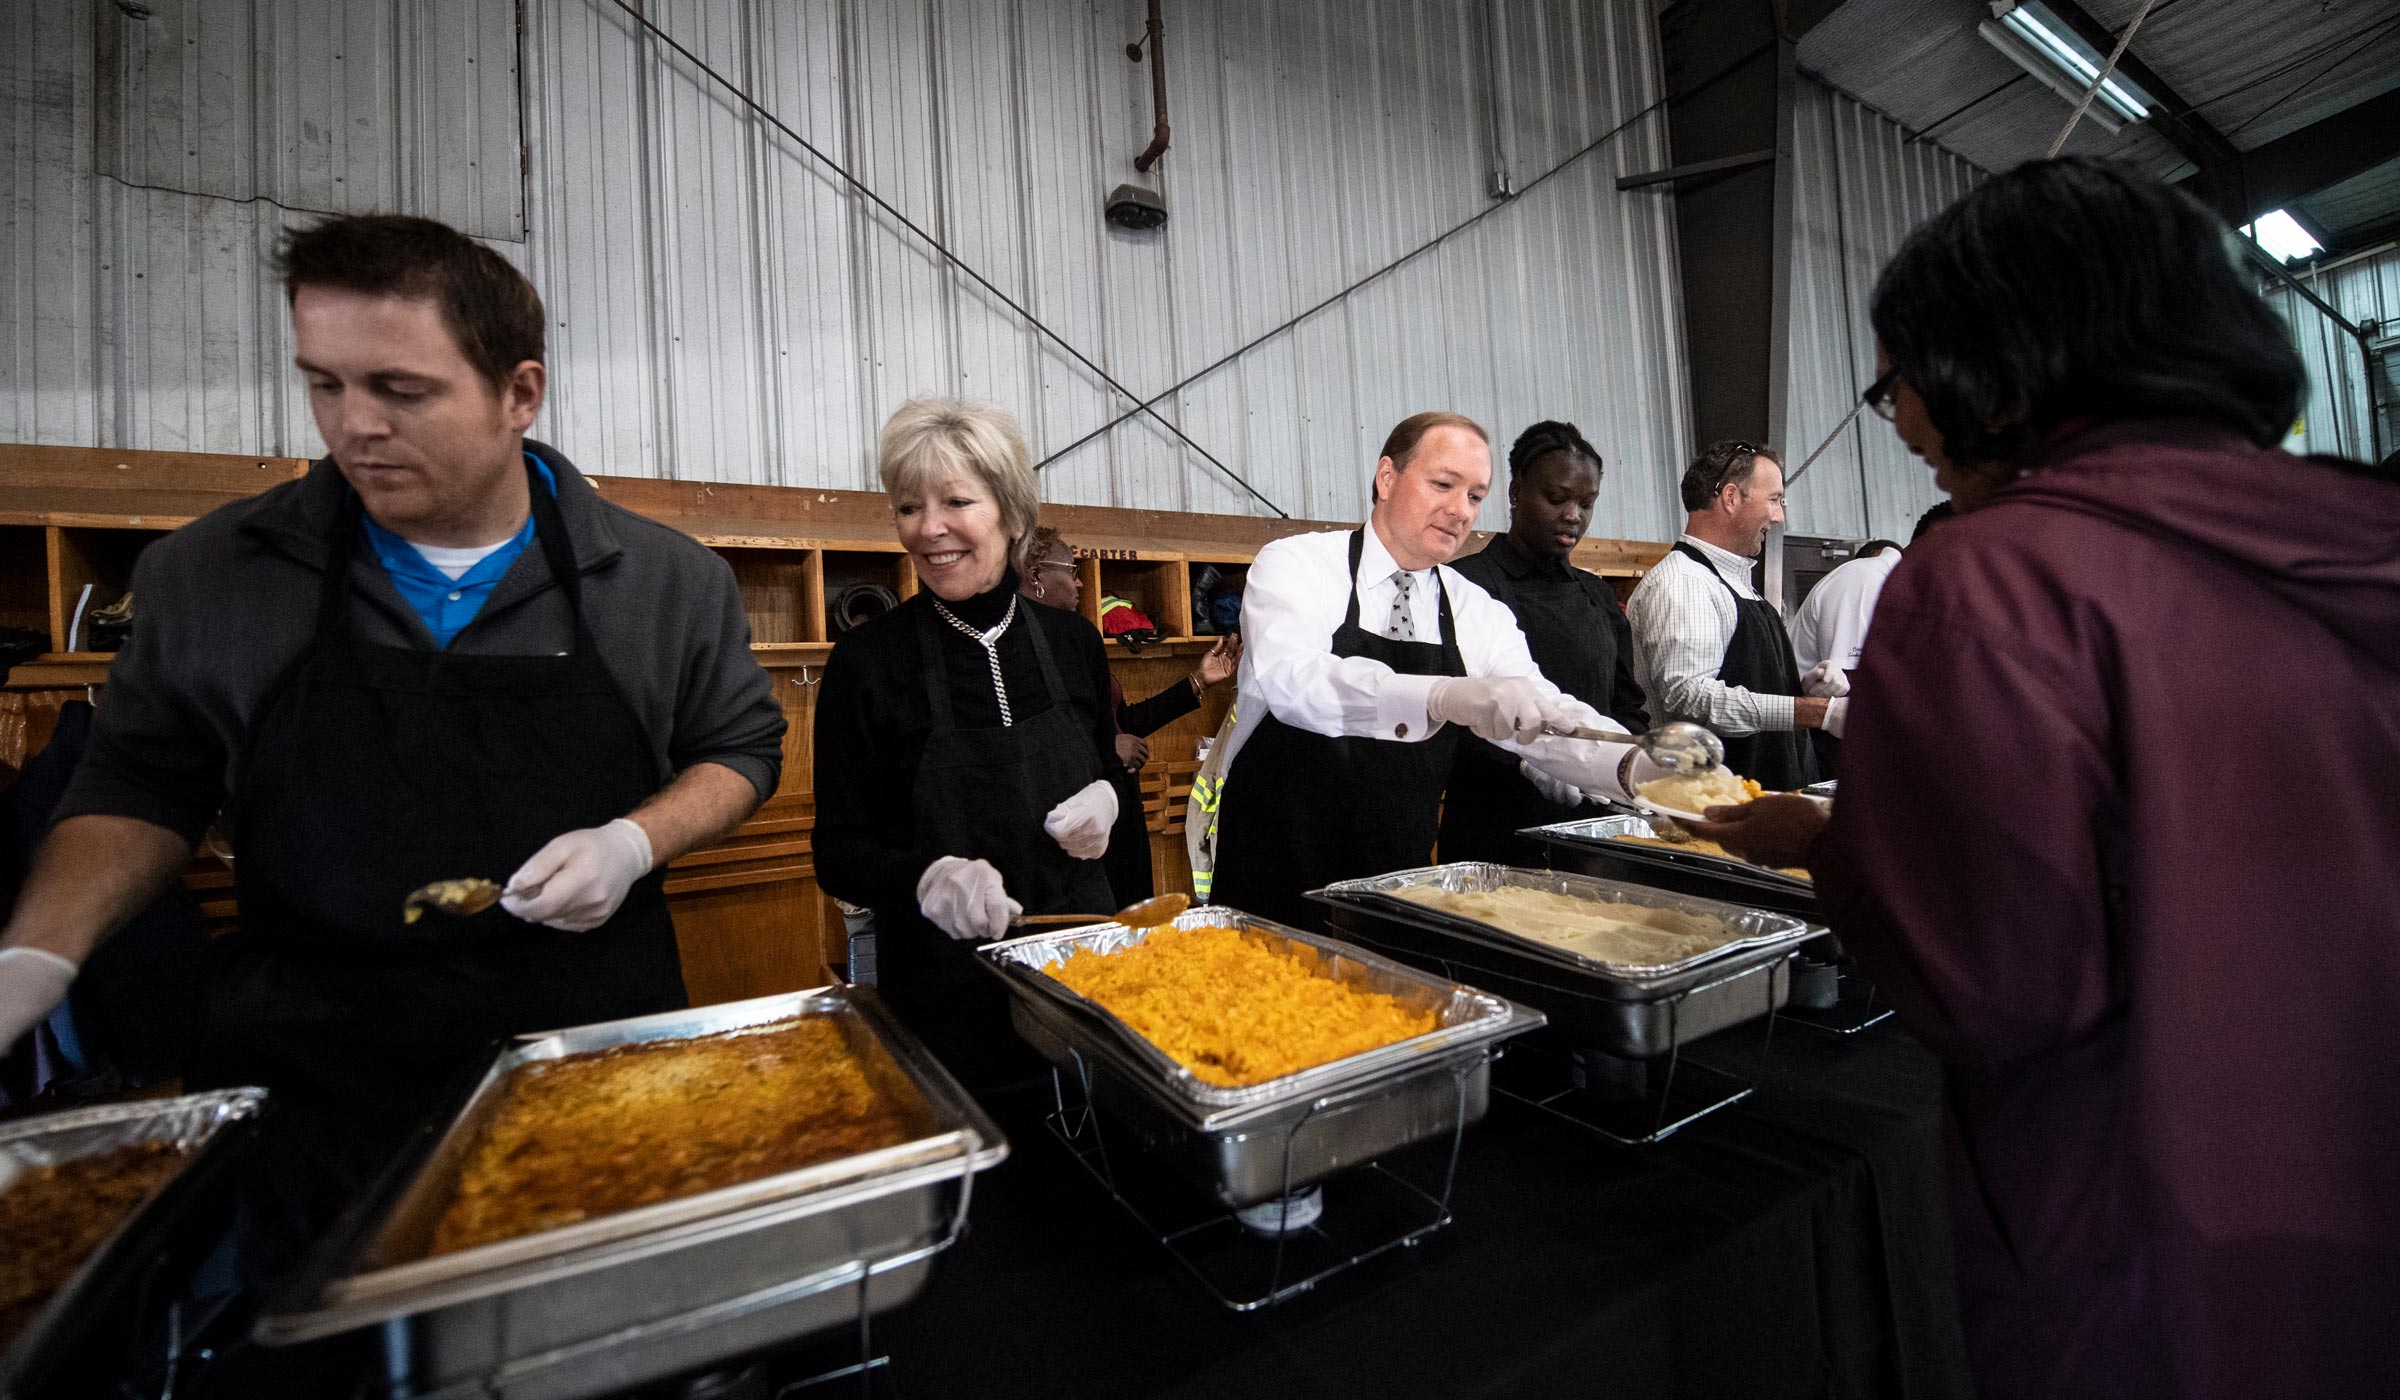 Mississippi State President Mark E. Keenum served food to Starkville firefighters and first responders.